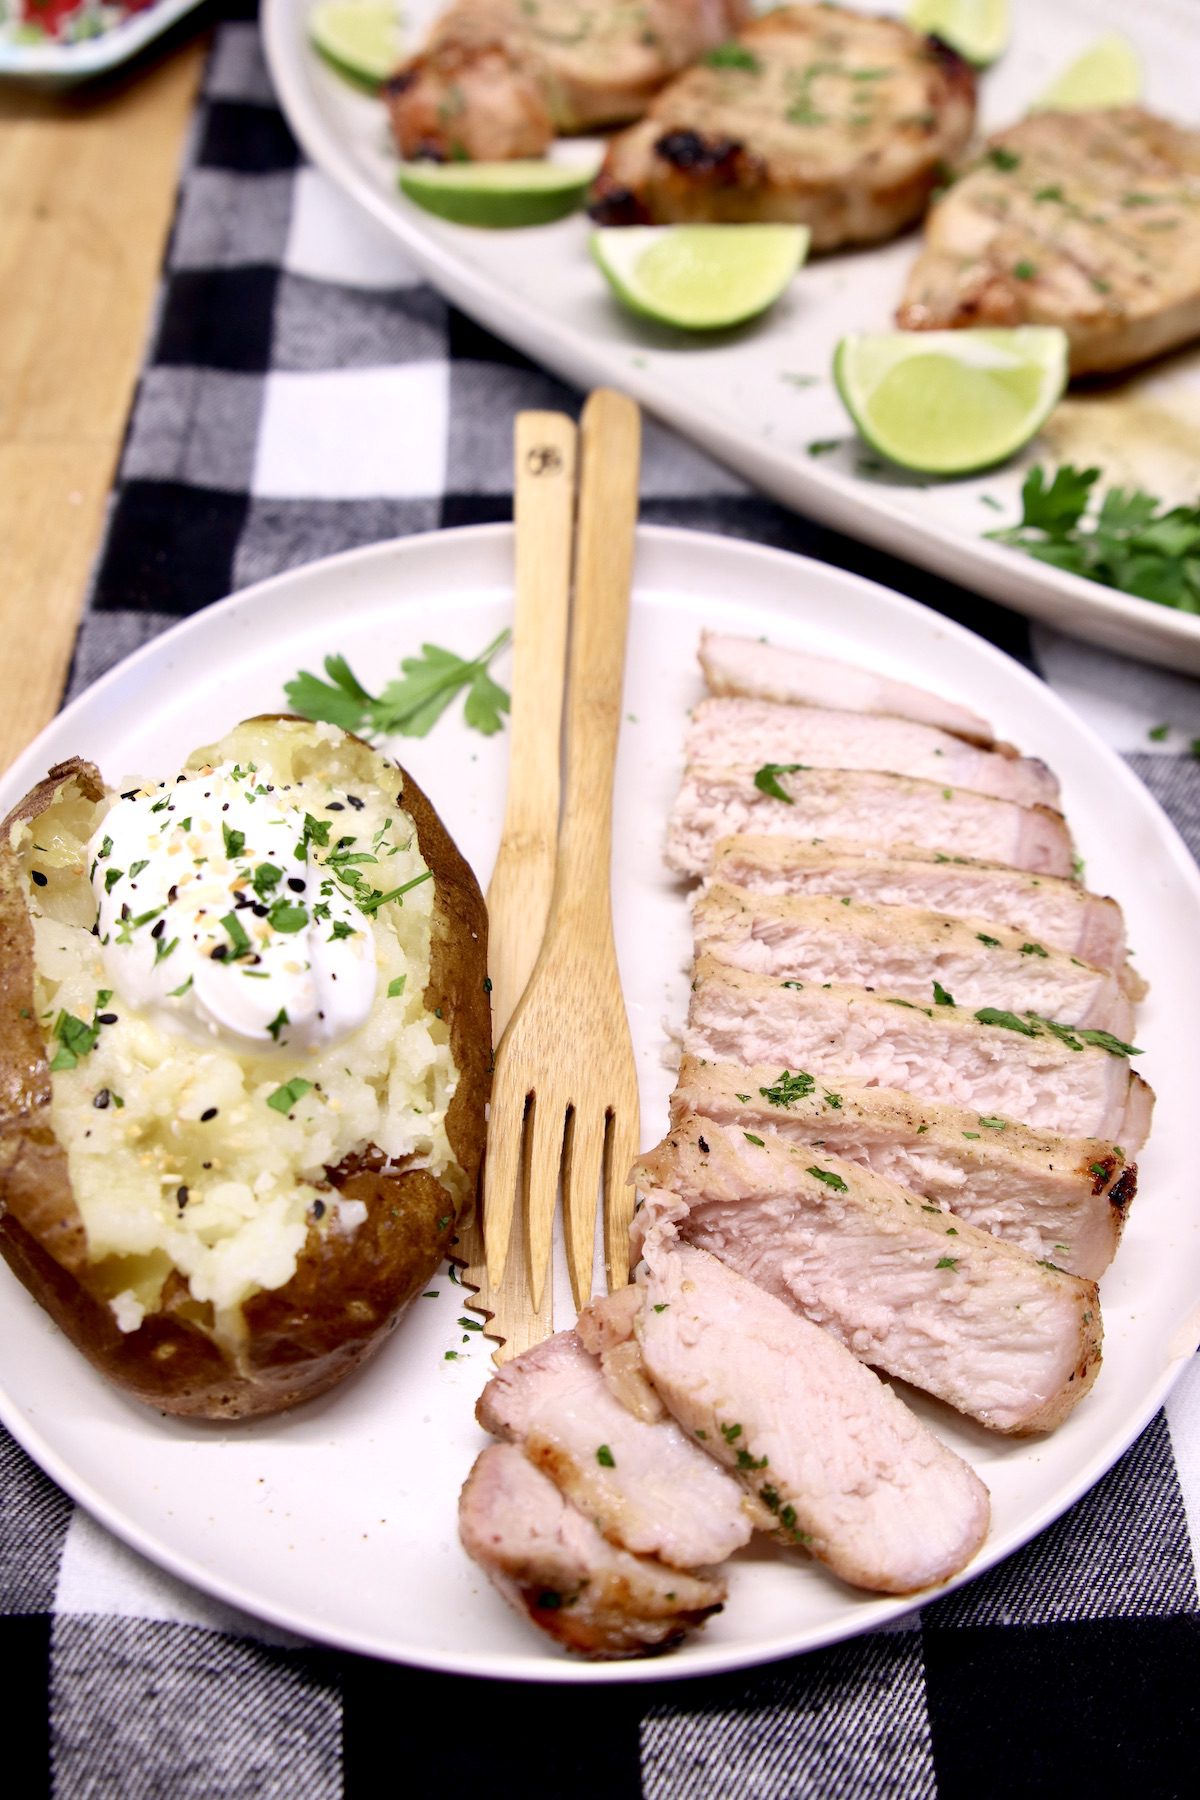 Grilled pork chops sliced on a plate with a baked potato, fork & knife